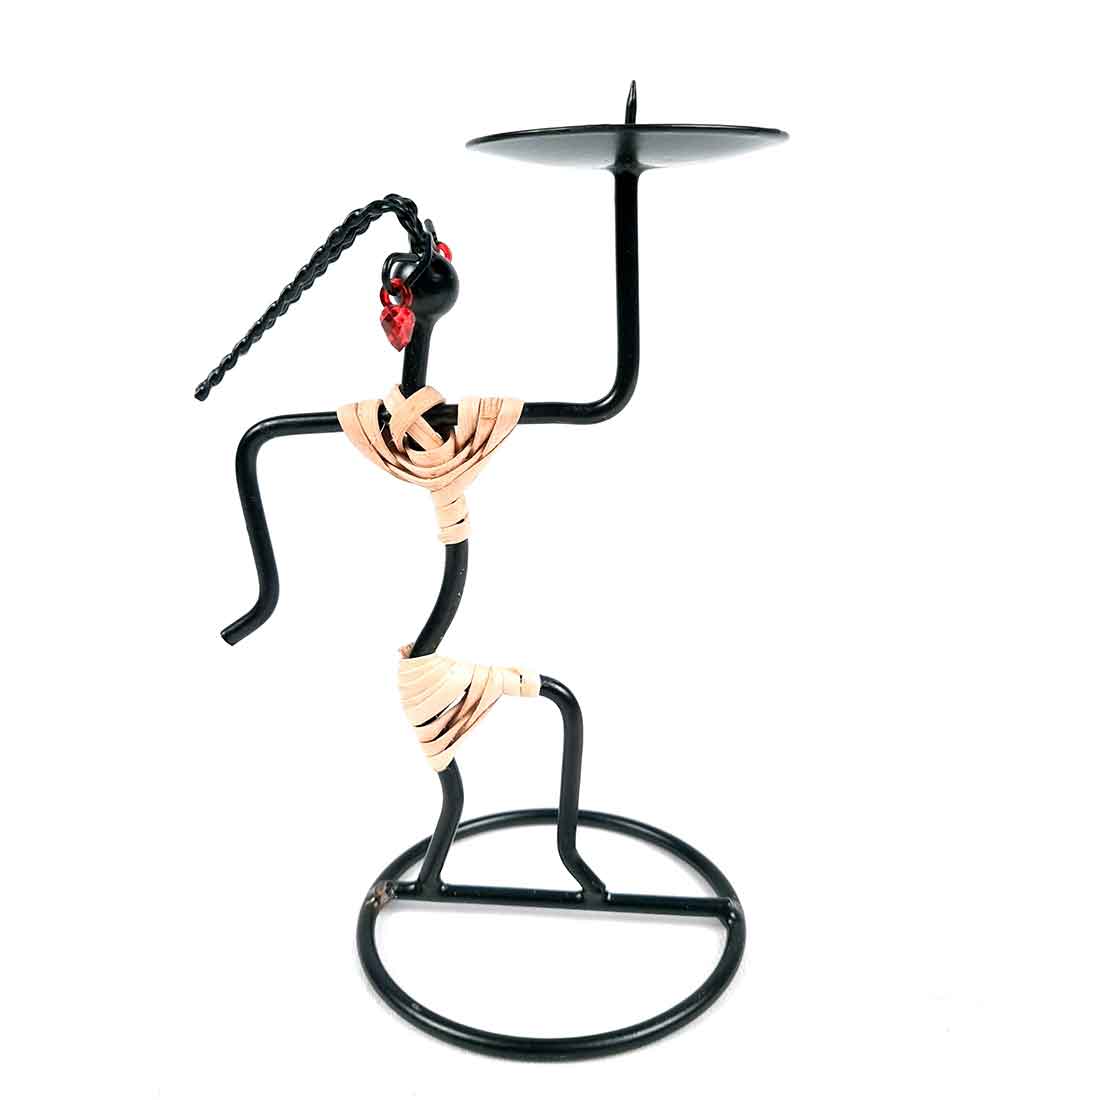 Candle Holder Stand | TeaLight Holder With One Slots Cum Showpiece  | Tea Light Candle Stands - Dancing Lady Design - For Home, Table, Living Room, Dining room, Bedroom Decor | For Diwali Decoration & Gifts - 5 Inch